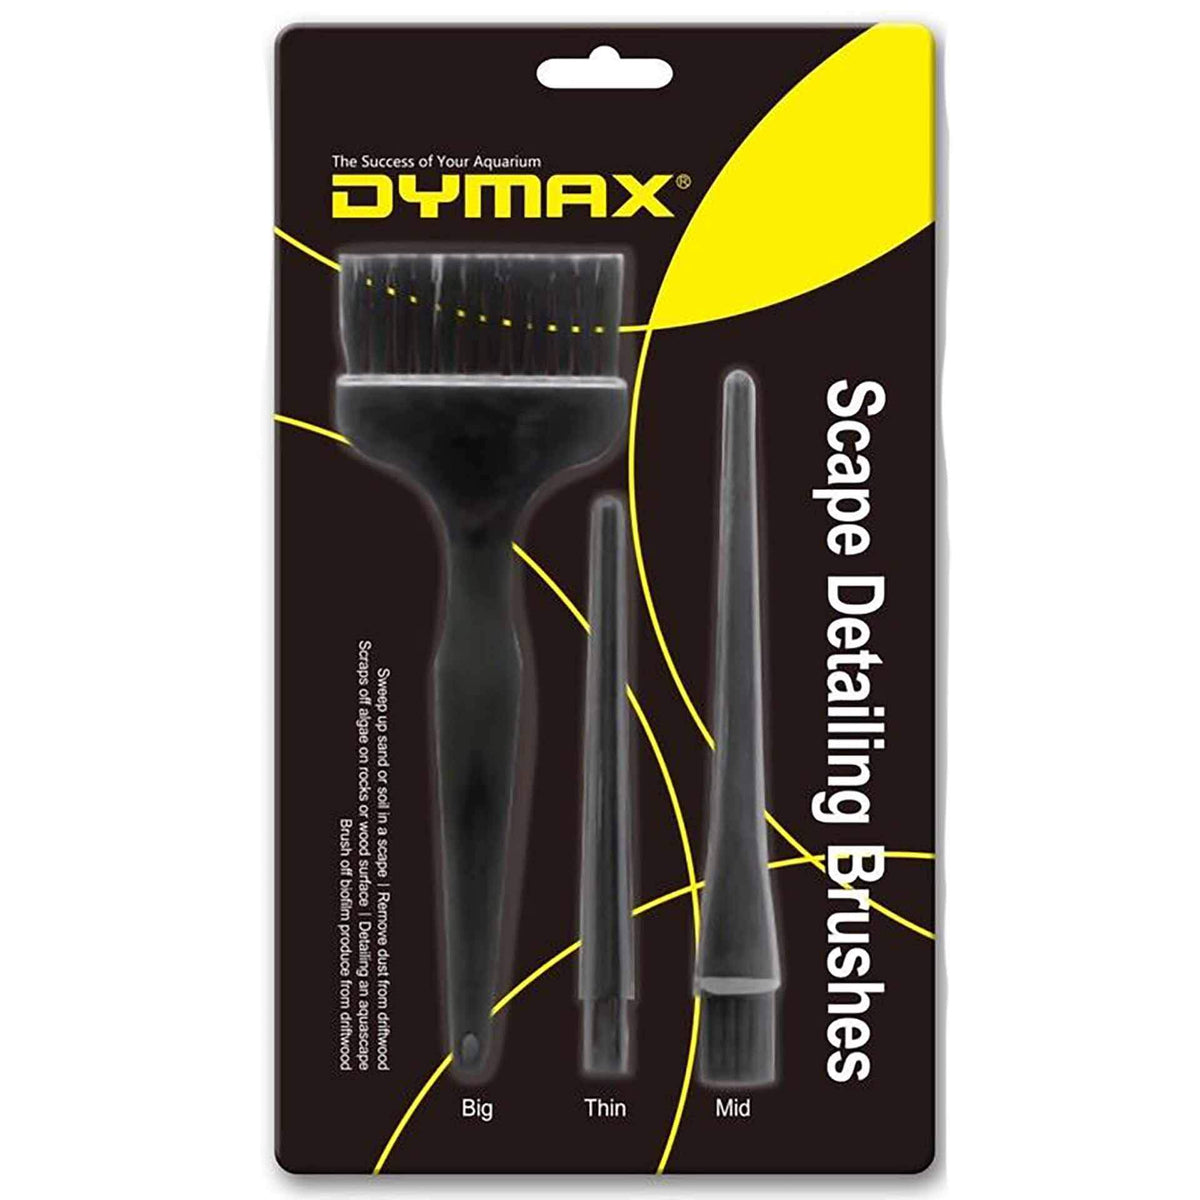 Dymax Scape Detailing Brushes (3pk)